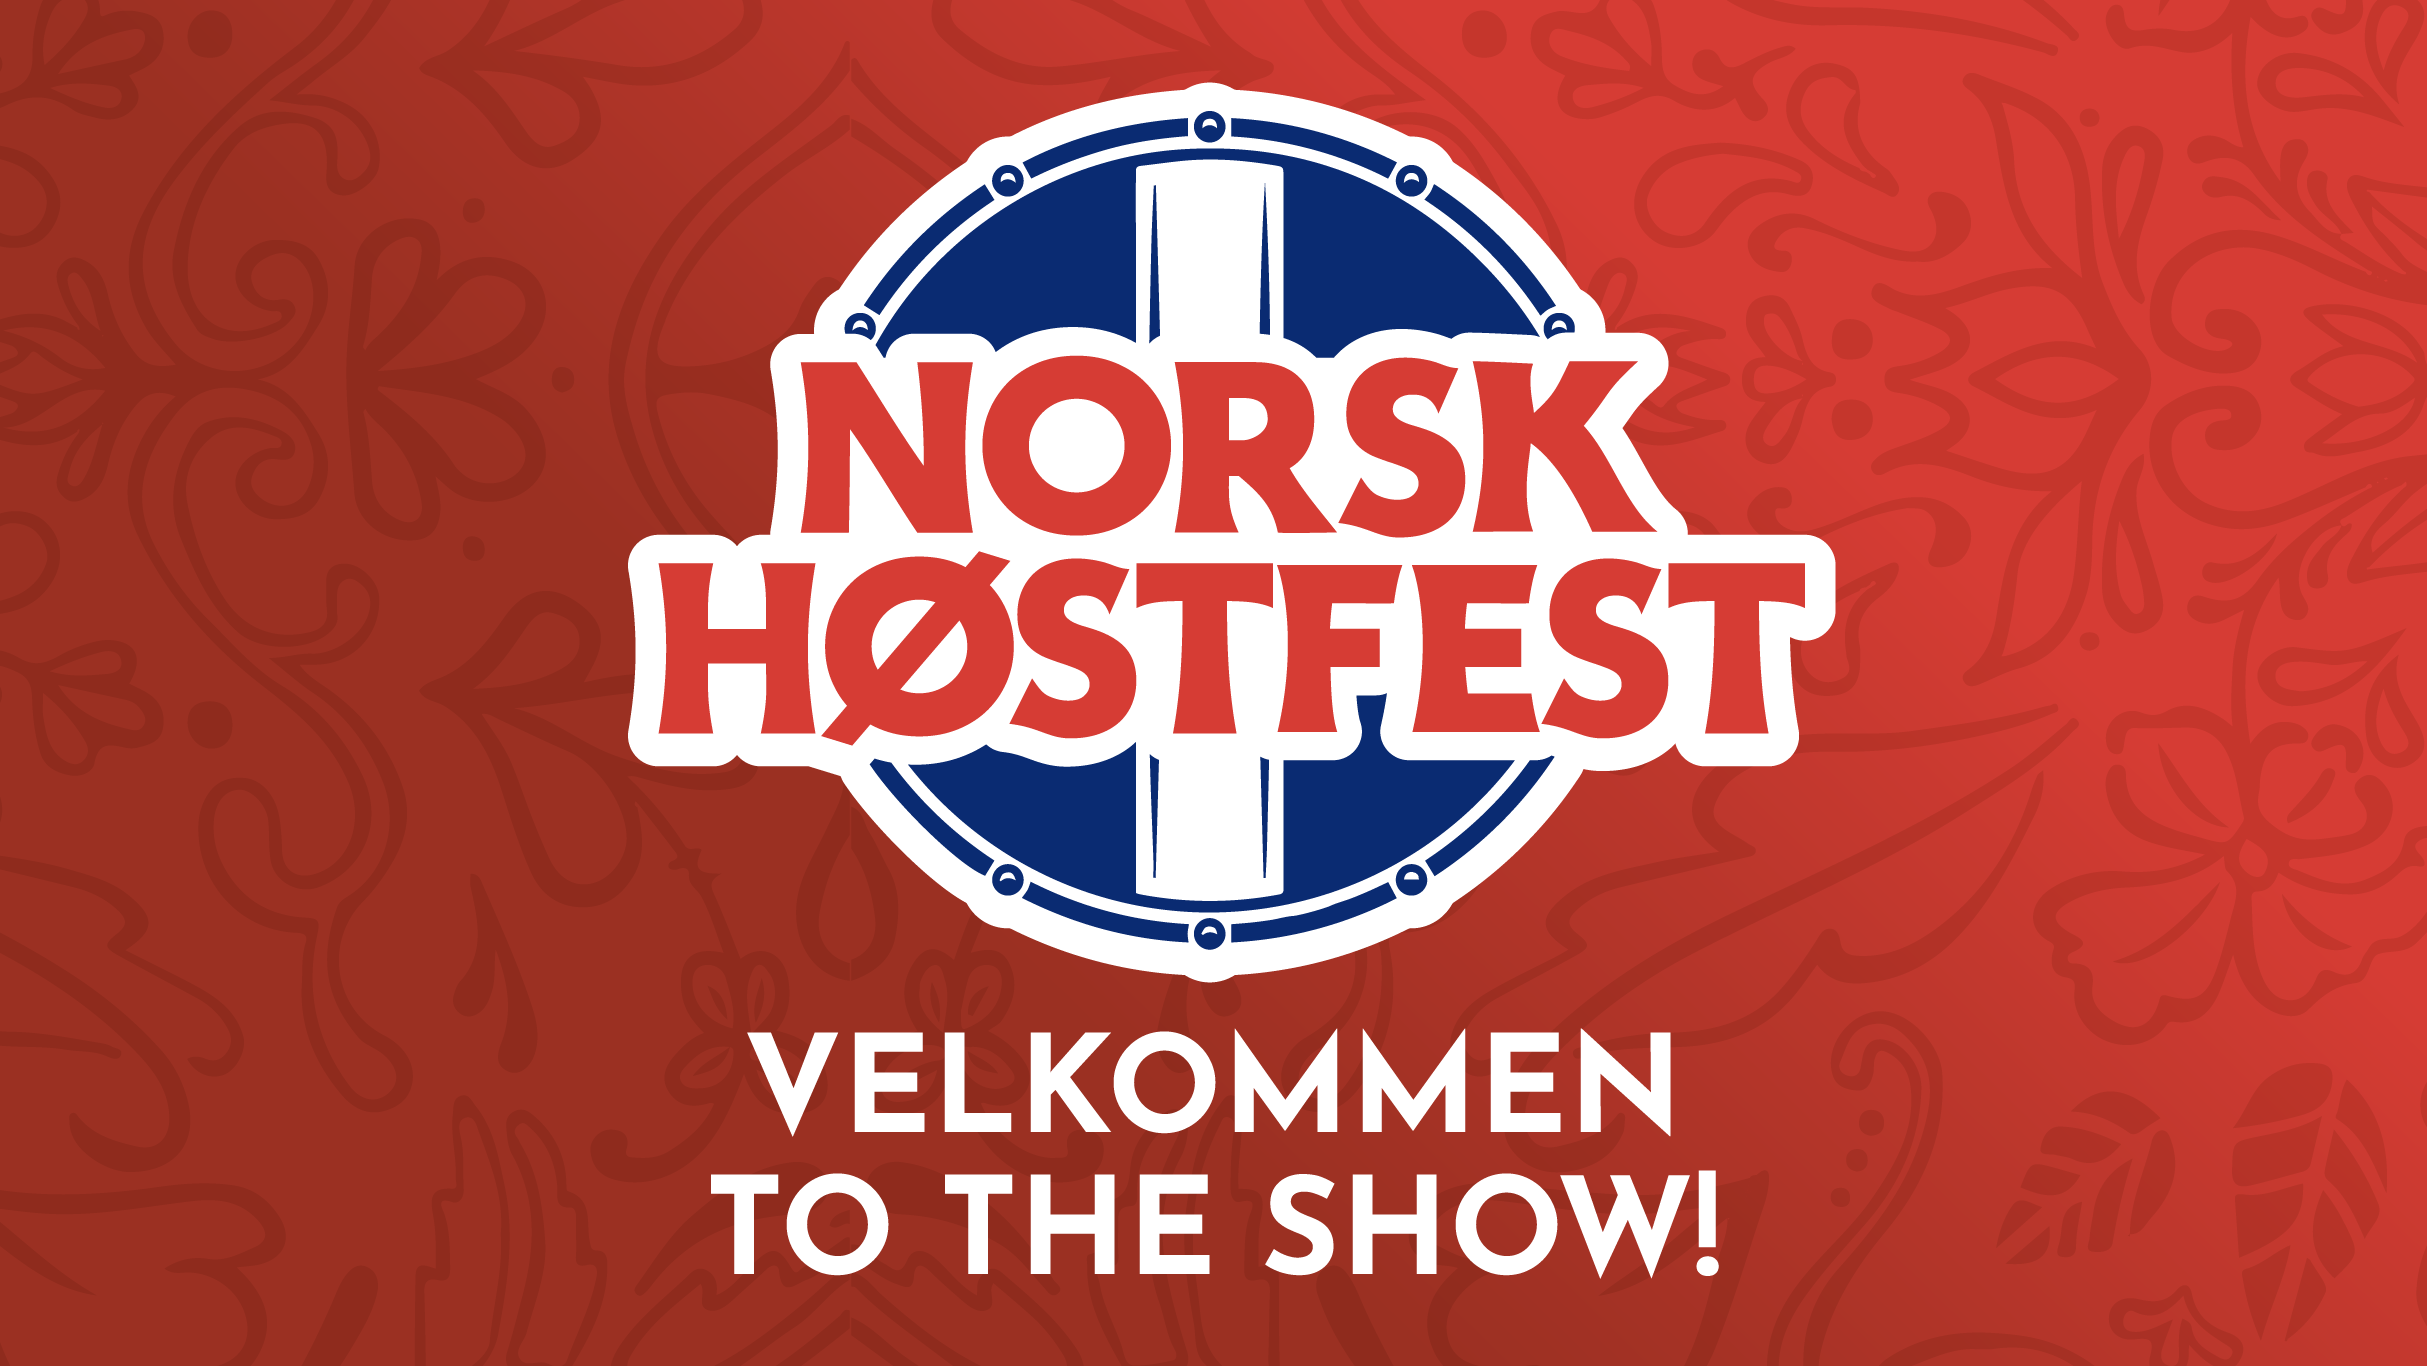 Norsk Høstfest Thursday in Minot promo photo for Friends of Chester Early Access presale offer code